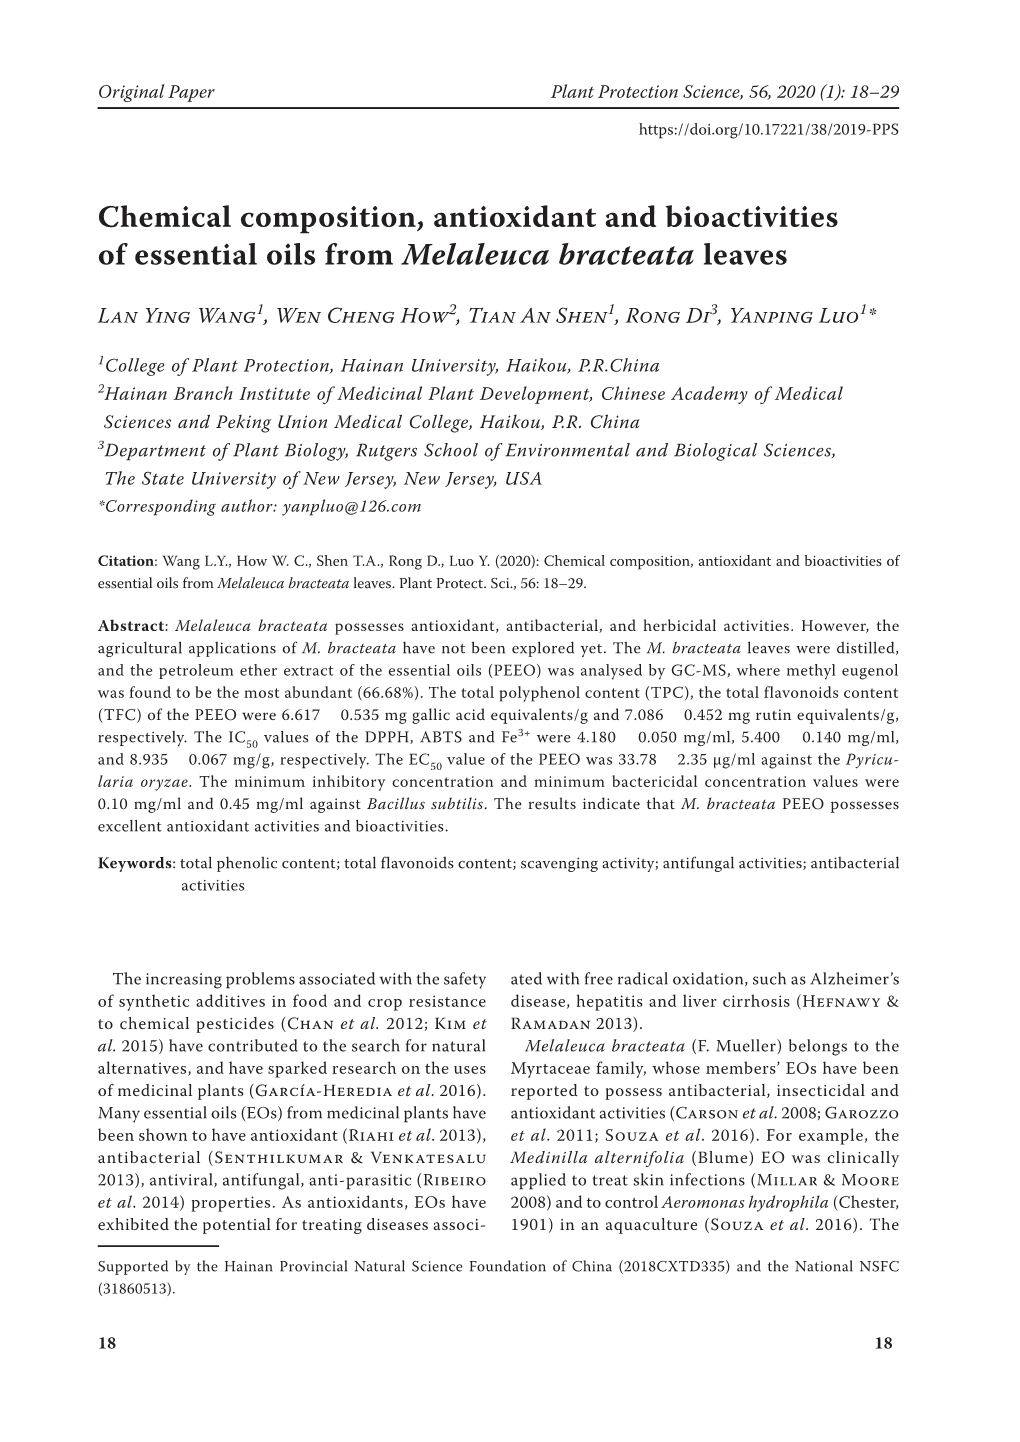 Chemical Composition, Antioxidant and Bioactivities of Essential Oils from Melaleuca Bracteata Leaves